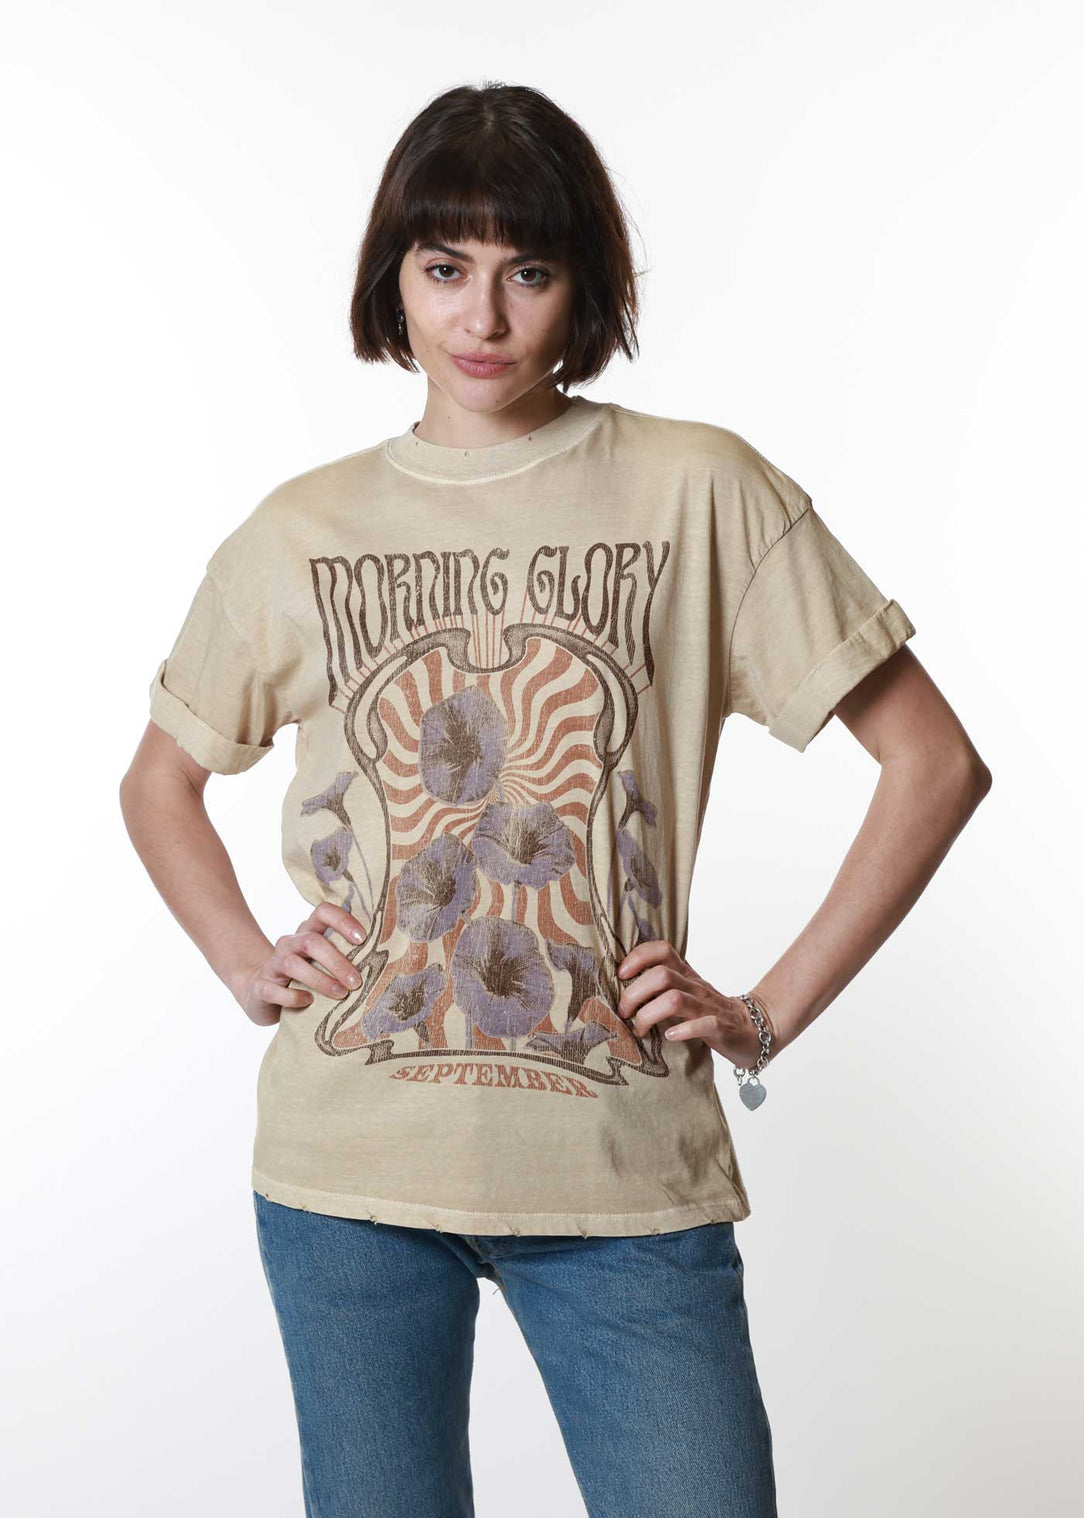 September Morning Glory Psychedelic Sand Boyfriend Tee